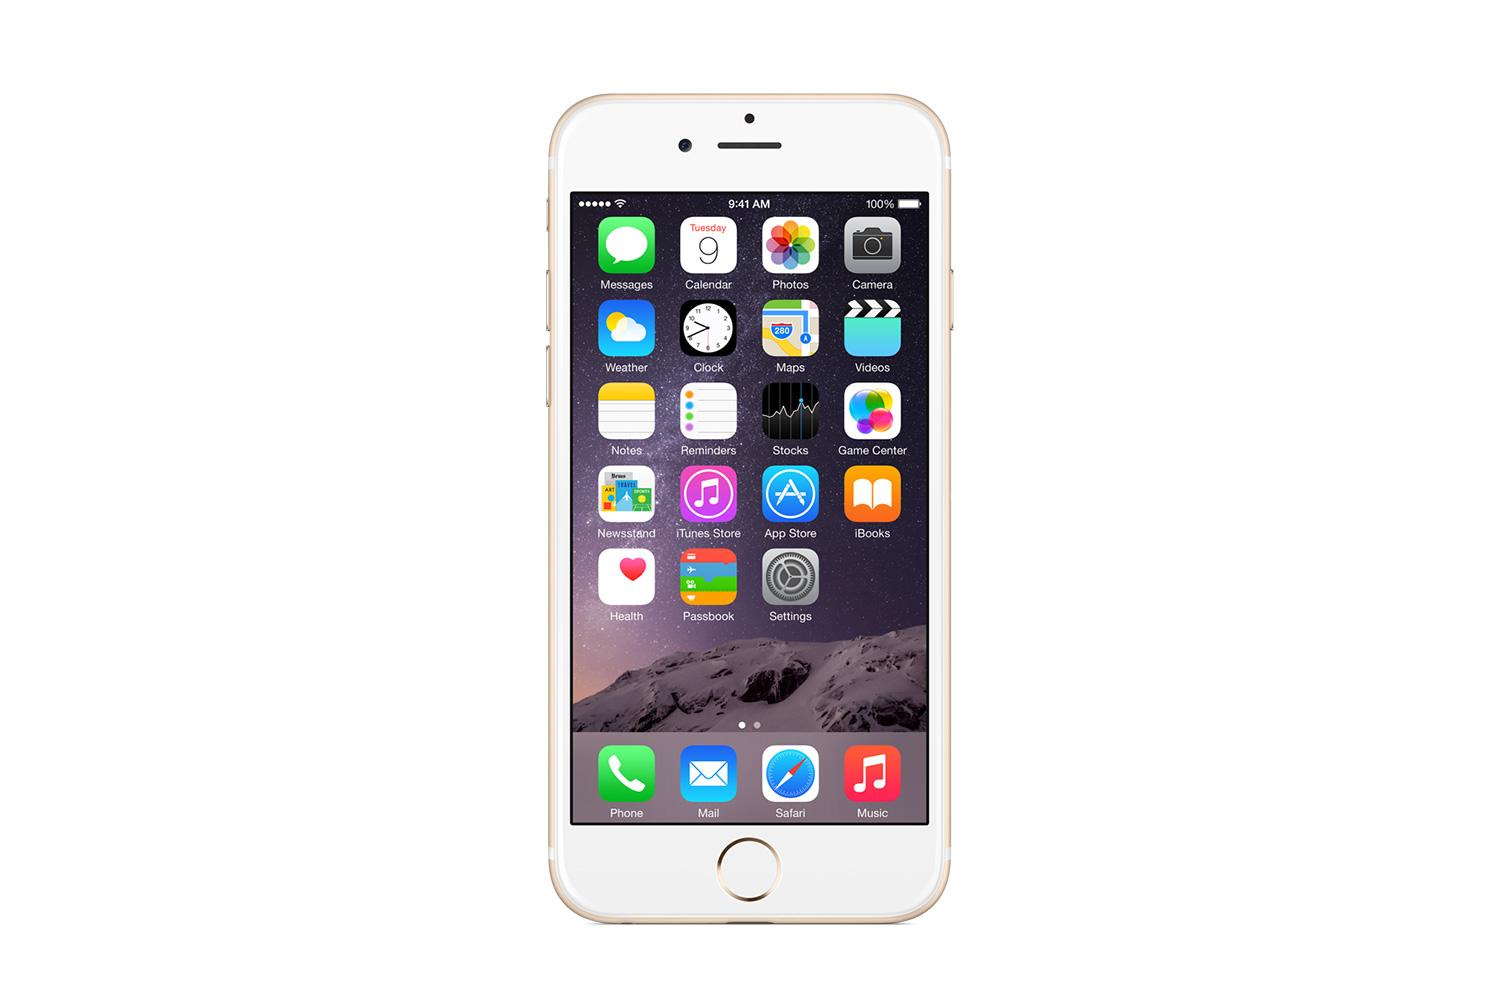 iphone 6 air features release rumors main